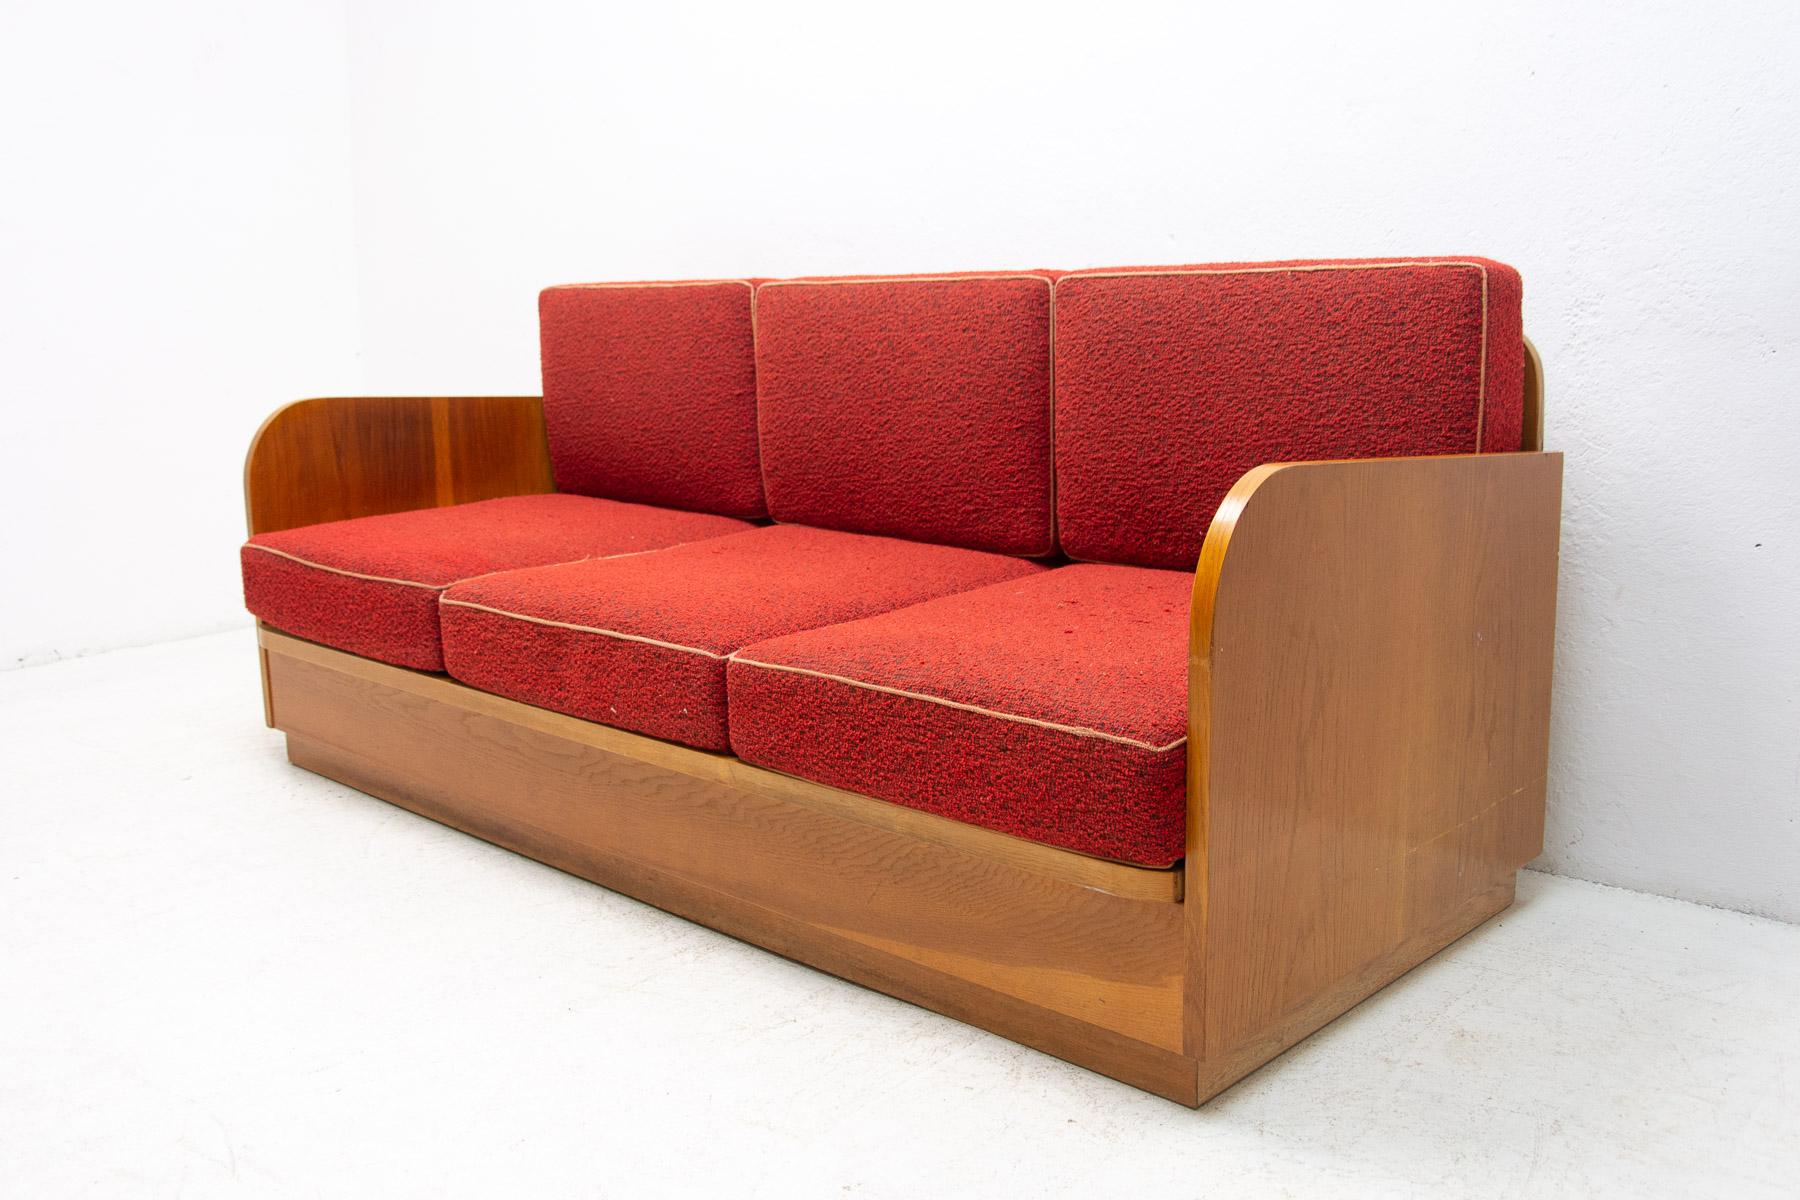 This folding sofa was made by Jitona company in 1959. Very attractive and simple design. The construction is of solid wood with beech wood veneer. Overall in good Vintage condition, showing signs of age and using.

Measures: Length: 196 cm, height